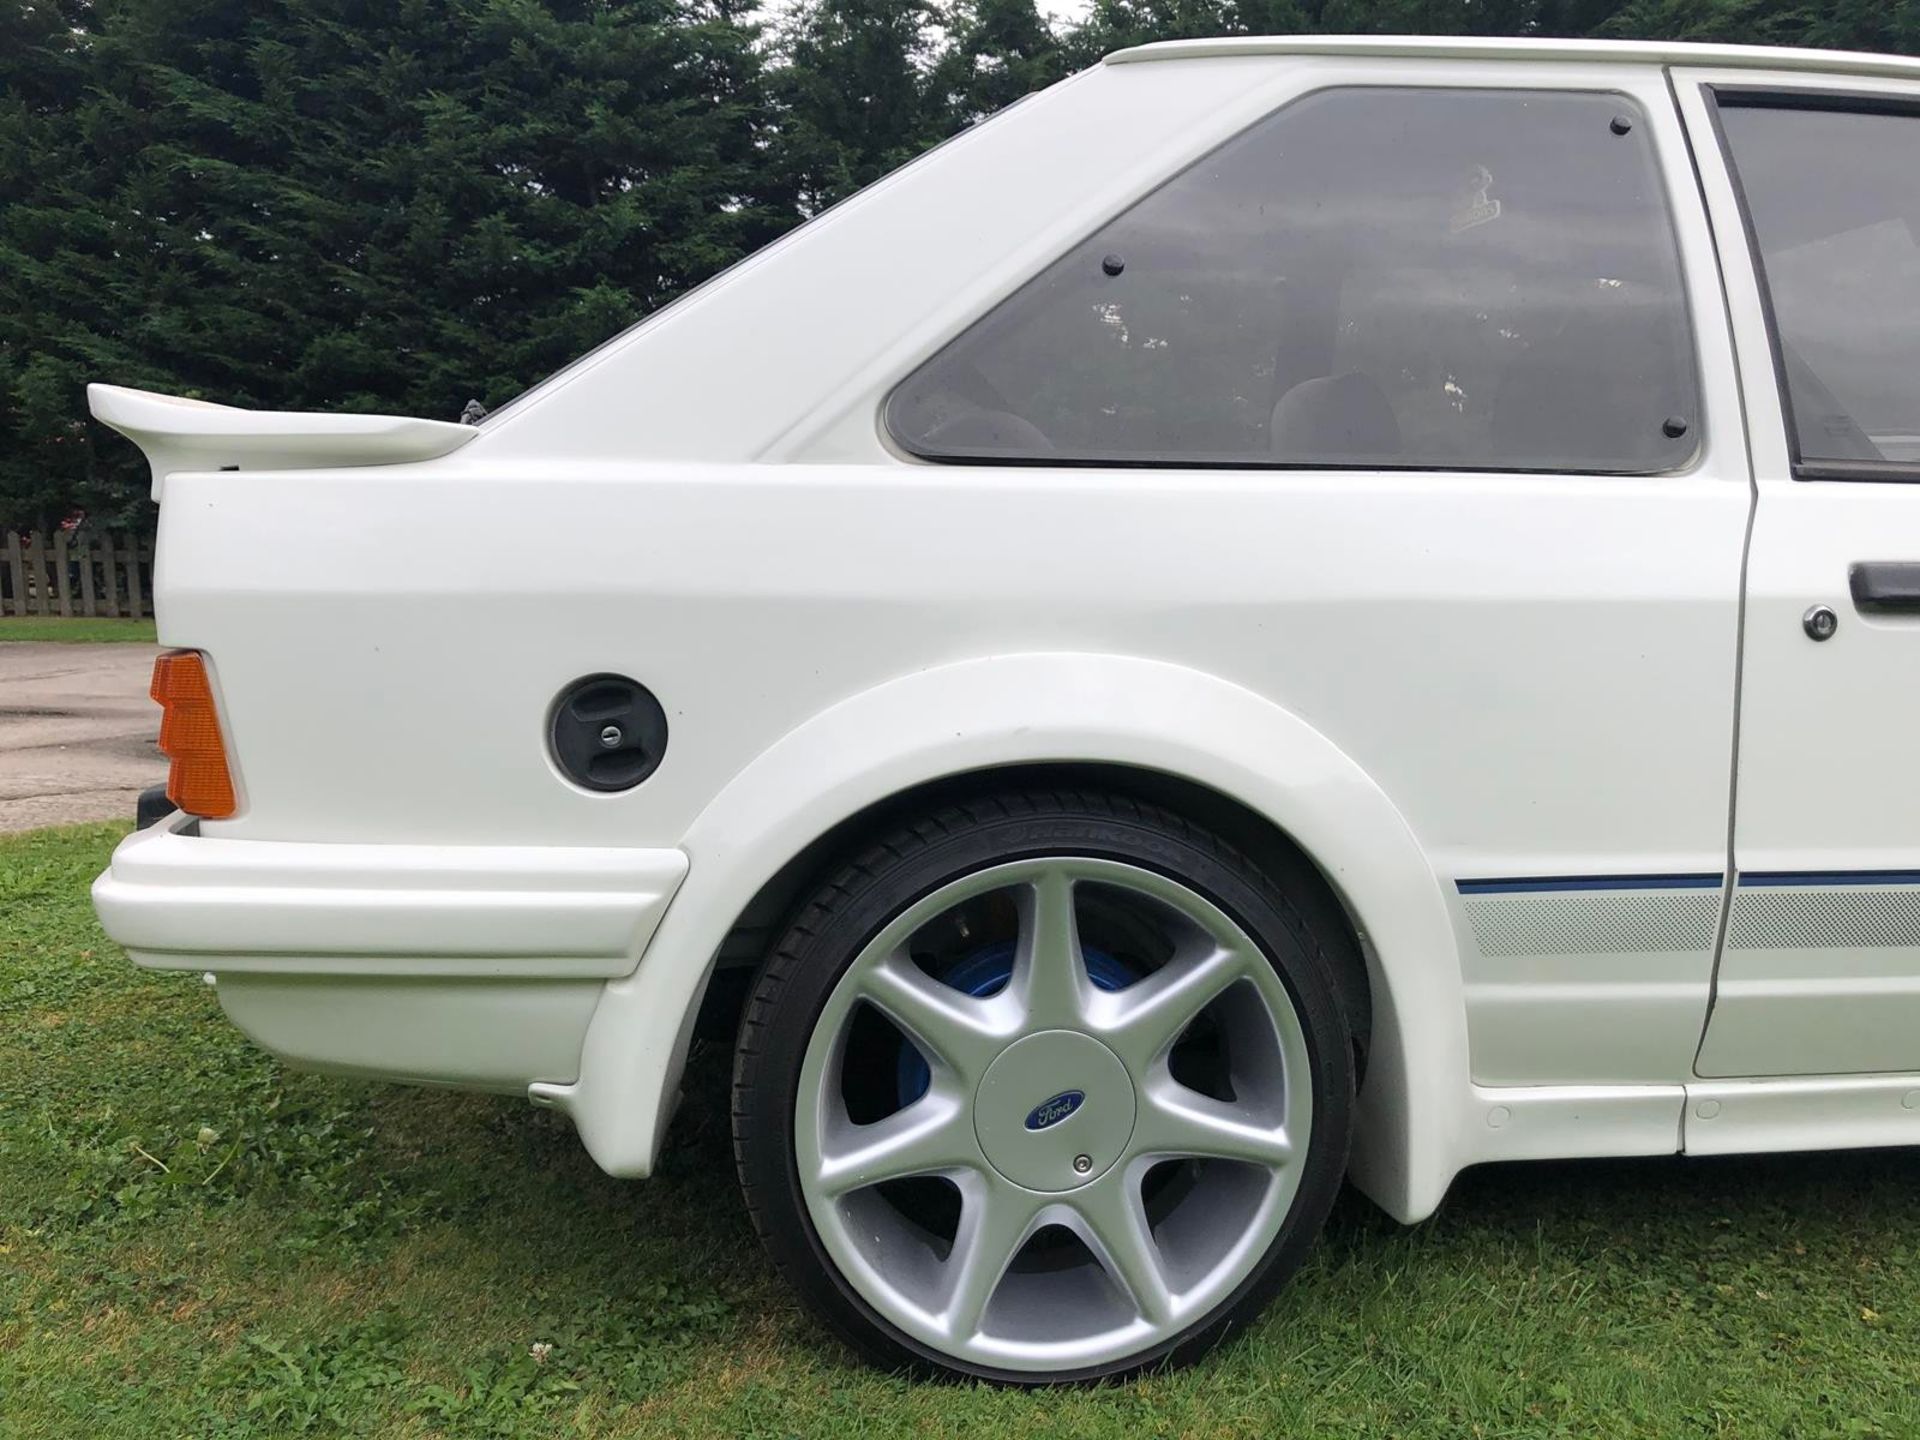 1985 Ford Escort RS Turbo Series 1 Registration number B434 PLD Diamond white with a grey Recaro - Image 8 of 79